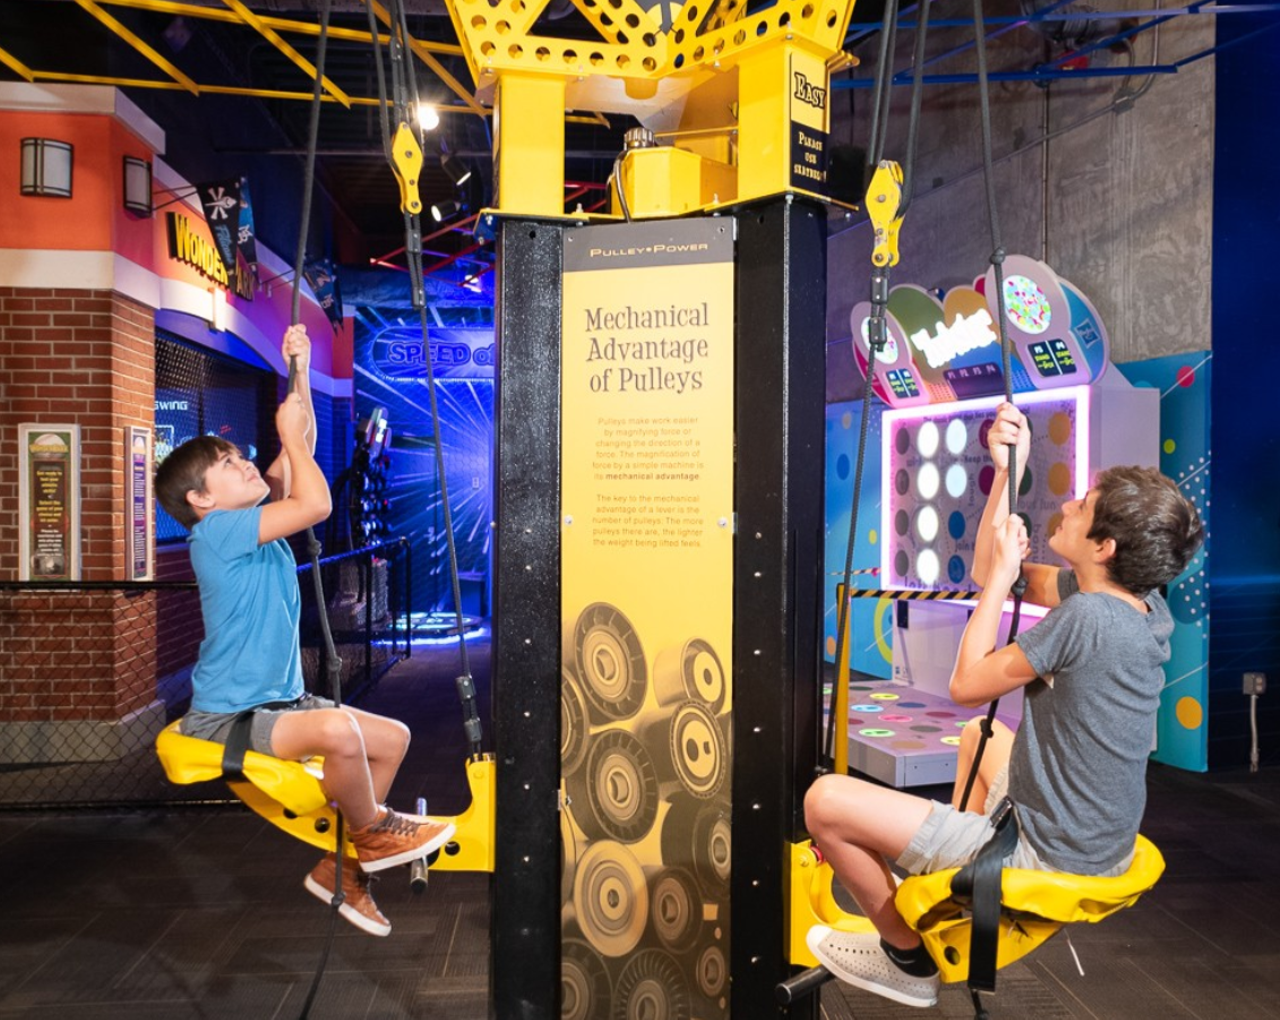 Exercise your mind at WonderWorks Orlando
9067 International Drive, Orlando
This all-around entertaining attraction offers an "amusement park for the mind." Visit the I-Drive emporium for a glimpse into more than 100 exhibits and attractions that will make your scratch your head in confusion or widen your eyes in surprise. There's also laser tag, a ropes course and a 6D motion ride.